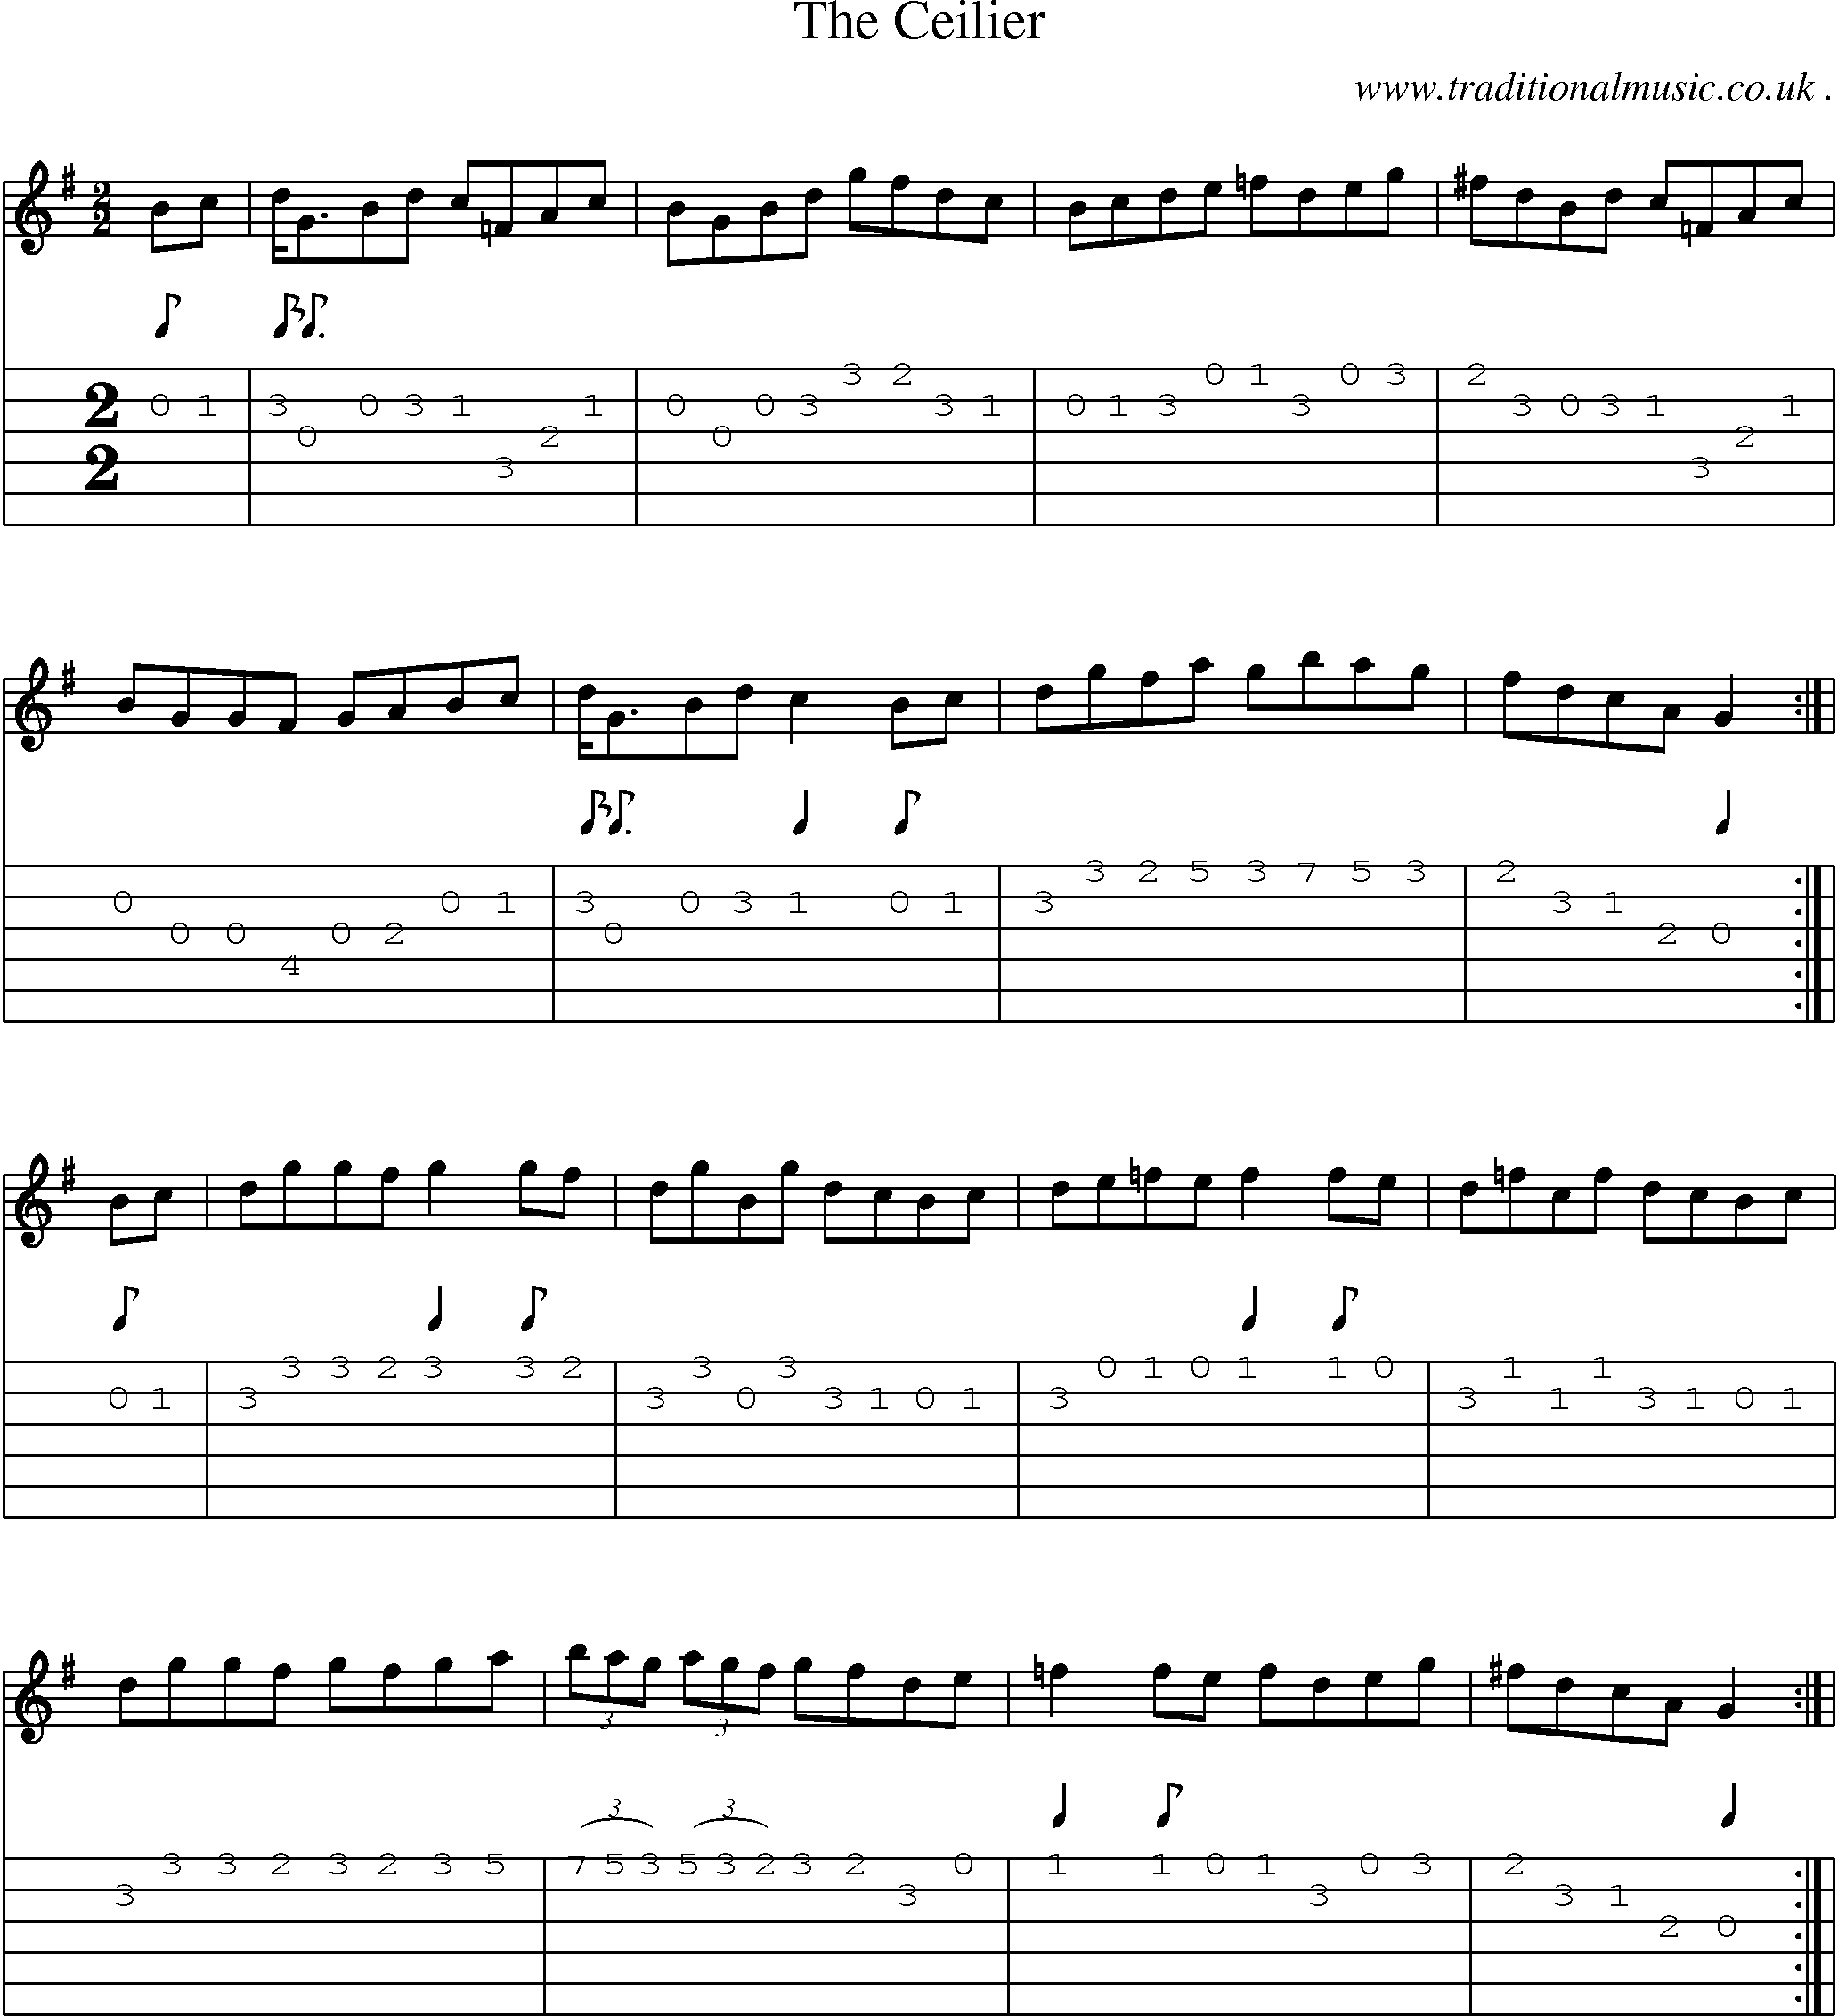 Sheet-Music and Guitar Tabs for The Ceilier